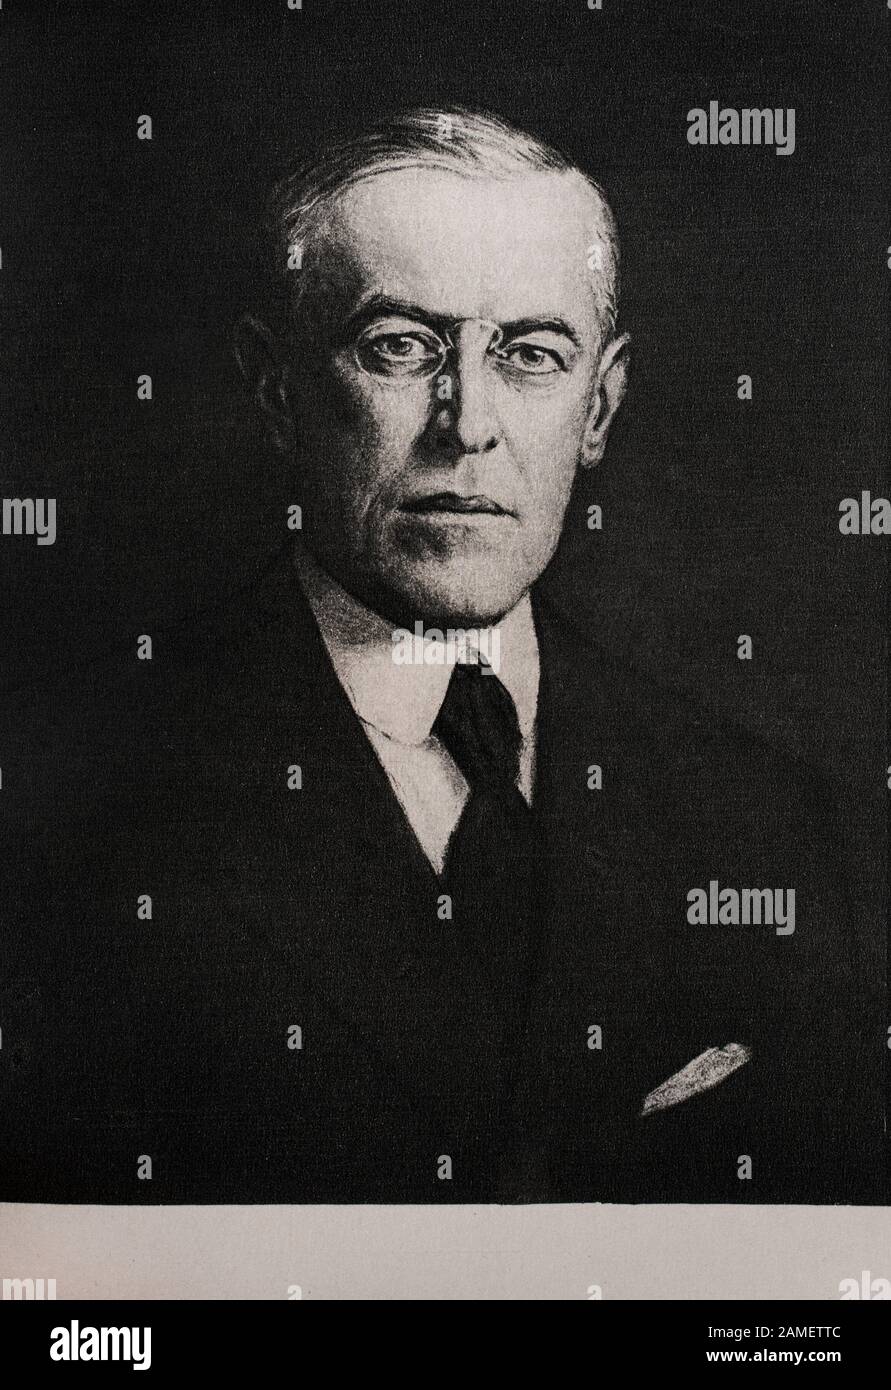 Thomas Woodrow Wilson (1856 – 1924) was an American politician, lawyer, and academic who served as the 28th president of the United States from 1913 t Stock Photo